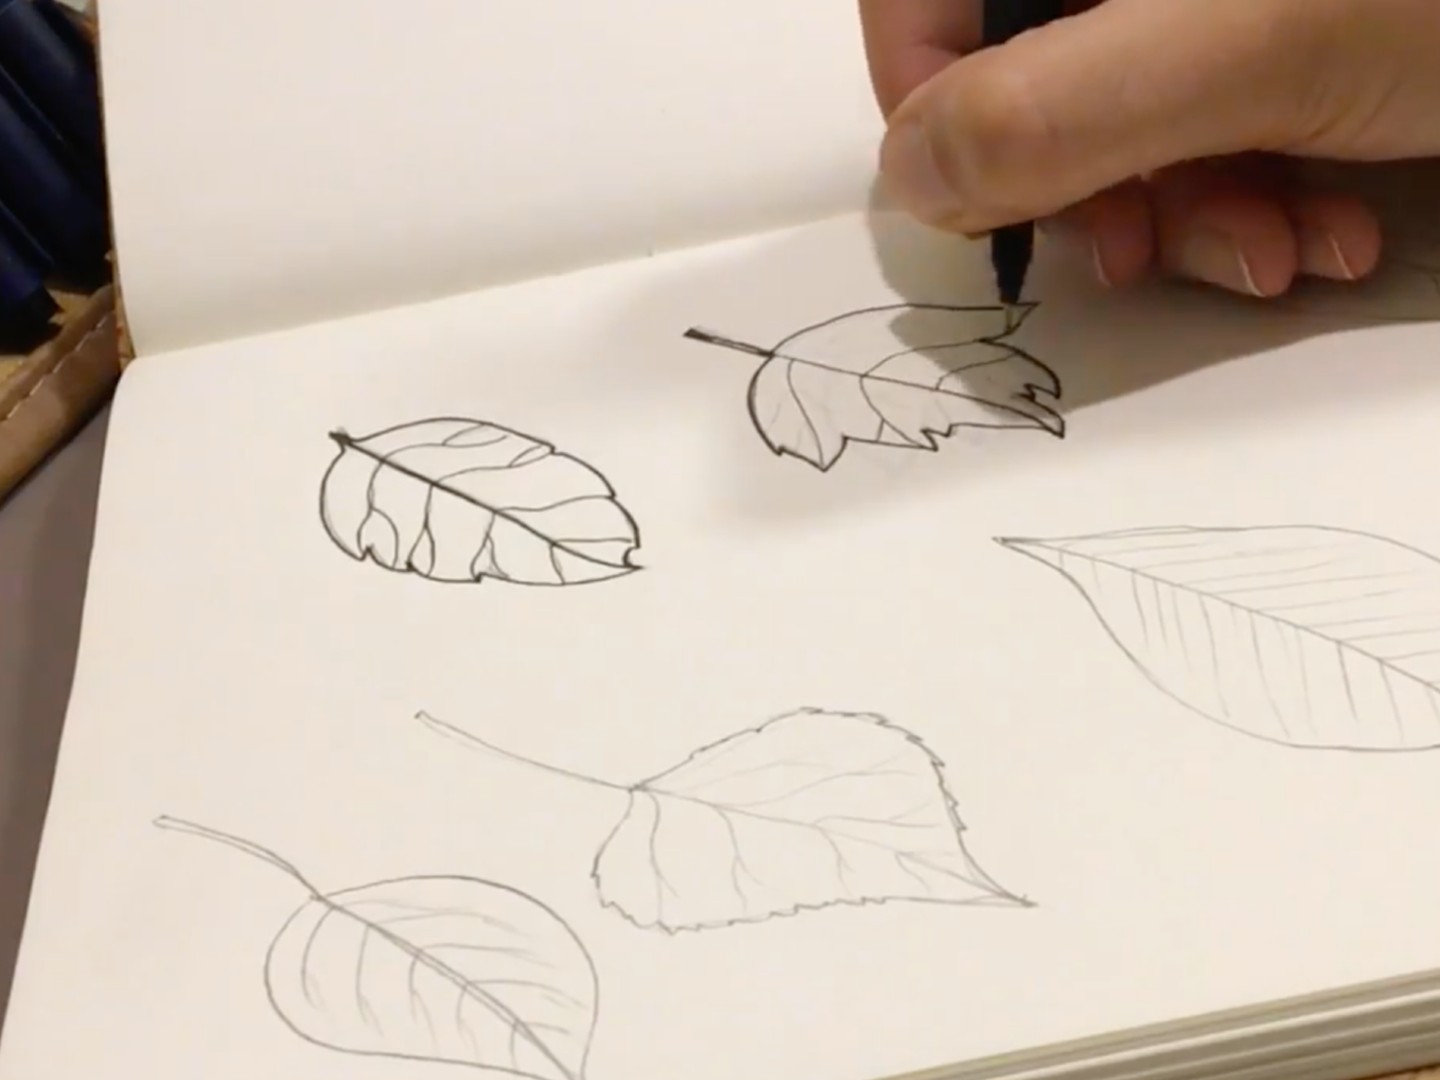 Five different leaf outlines on a sheet of white paper. The first leaf has been traced using a pen, the second leaf is being traced, and the remaining three have yet to be traced. 